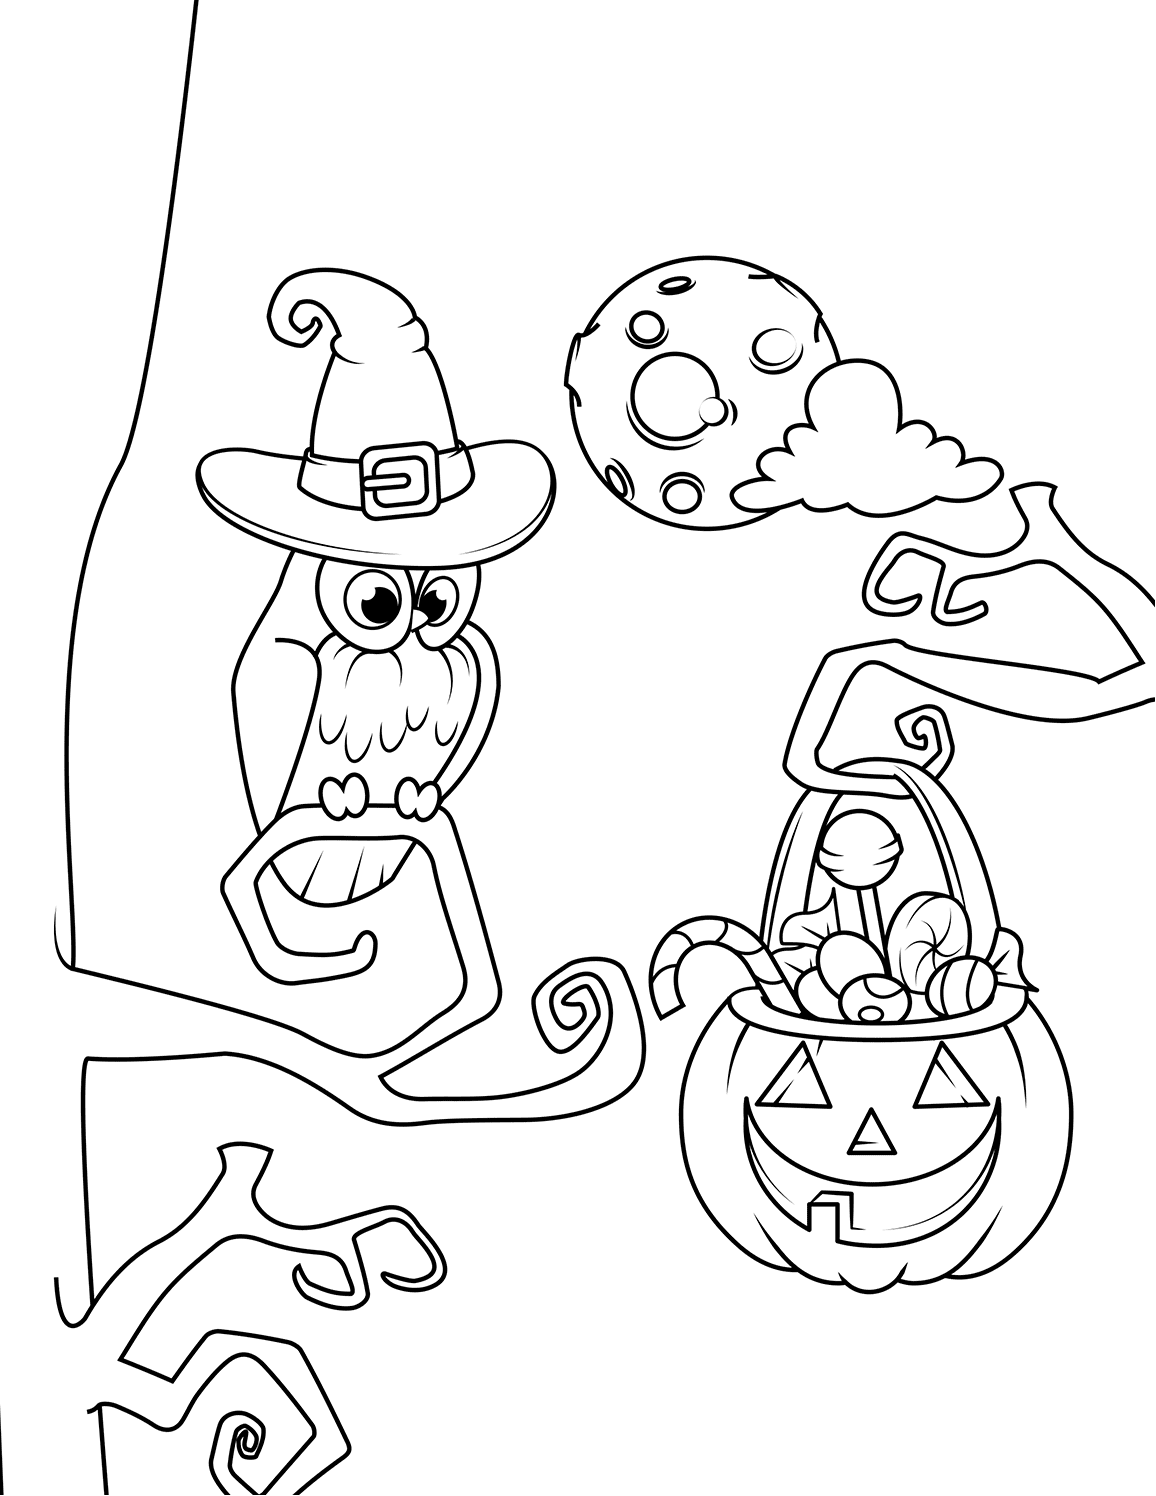 Owl And Jack O Lantern With Candies Halloween Coloring Page